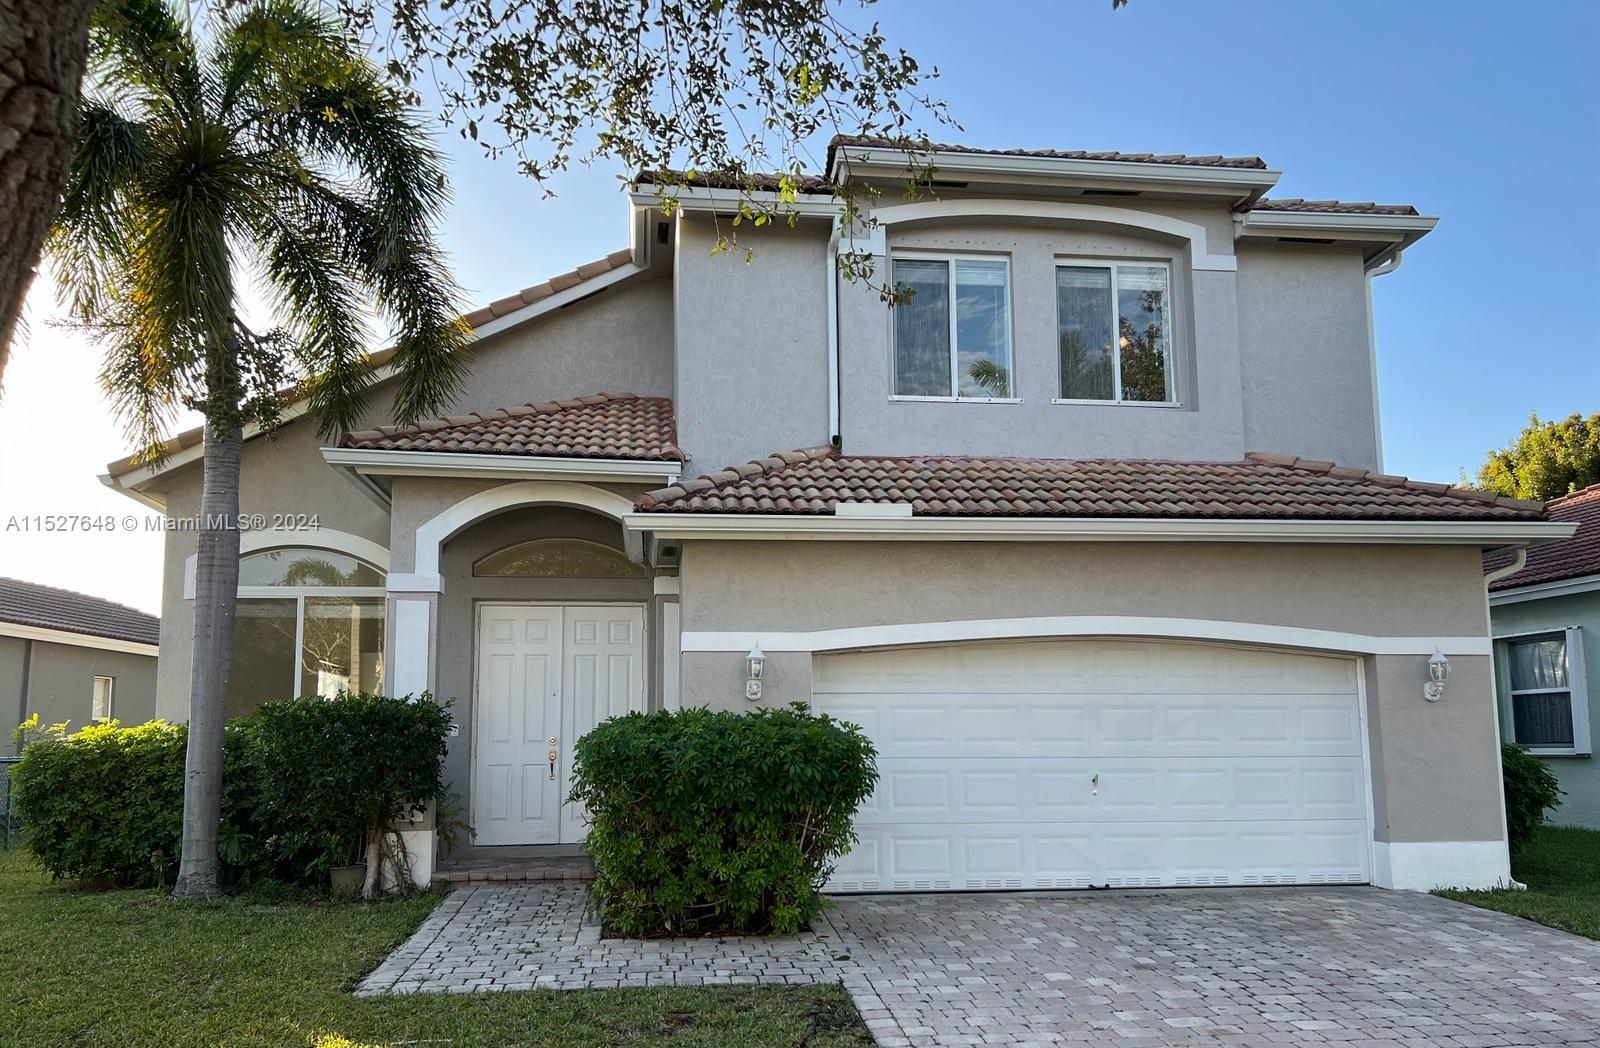 Photo of 2102 SE 17th Ave in Homestead, FL